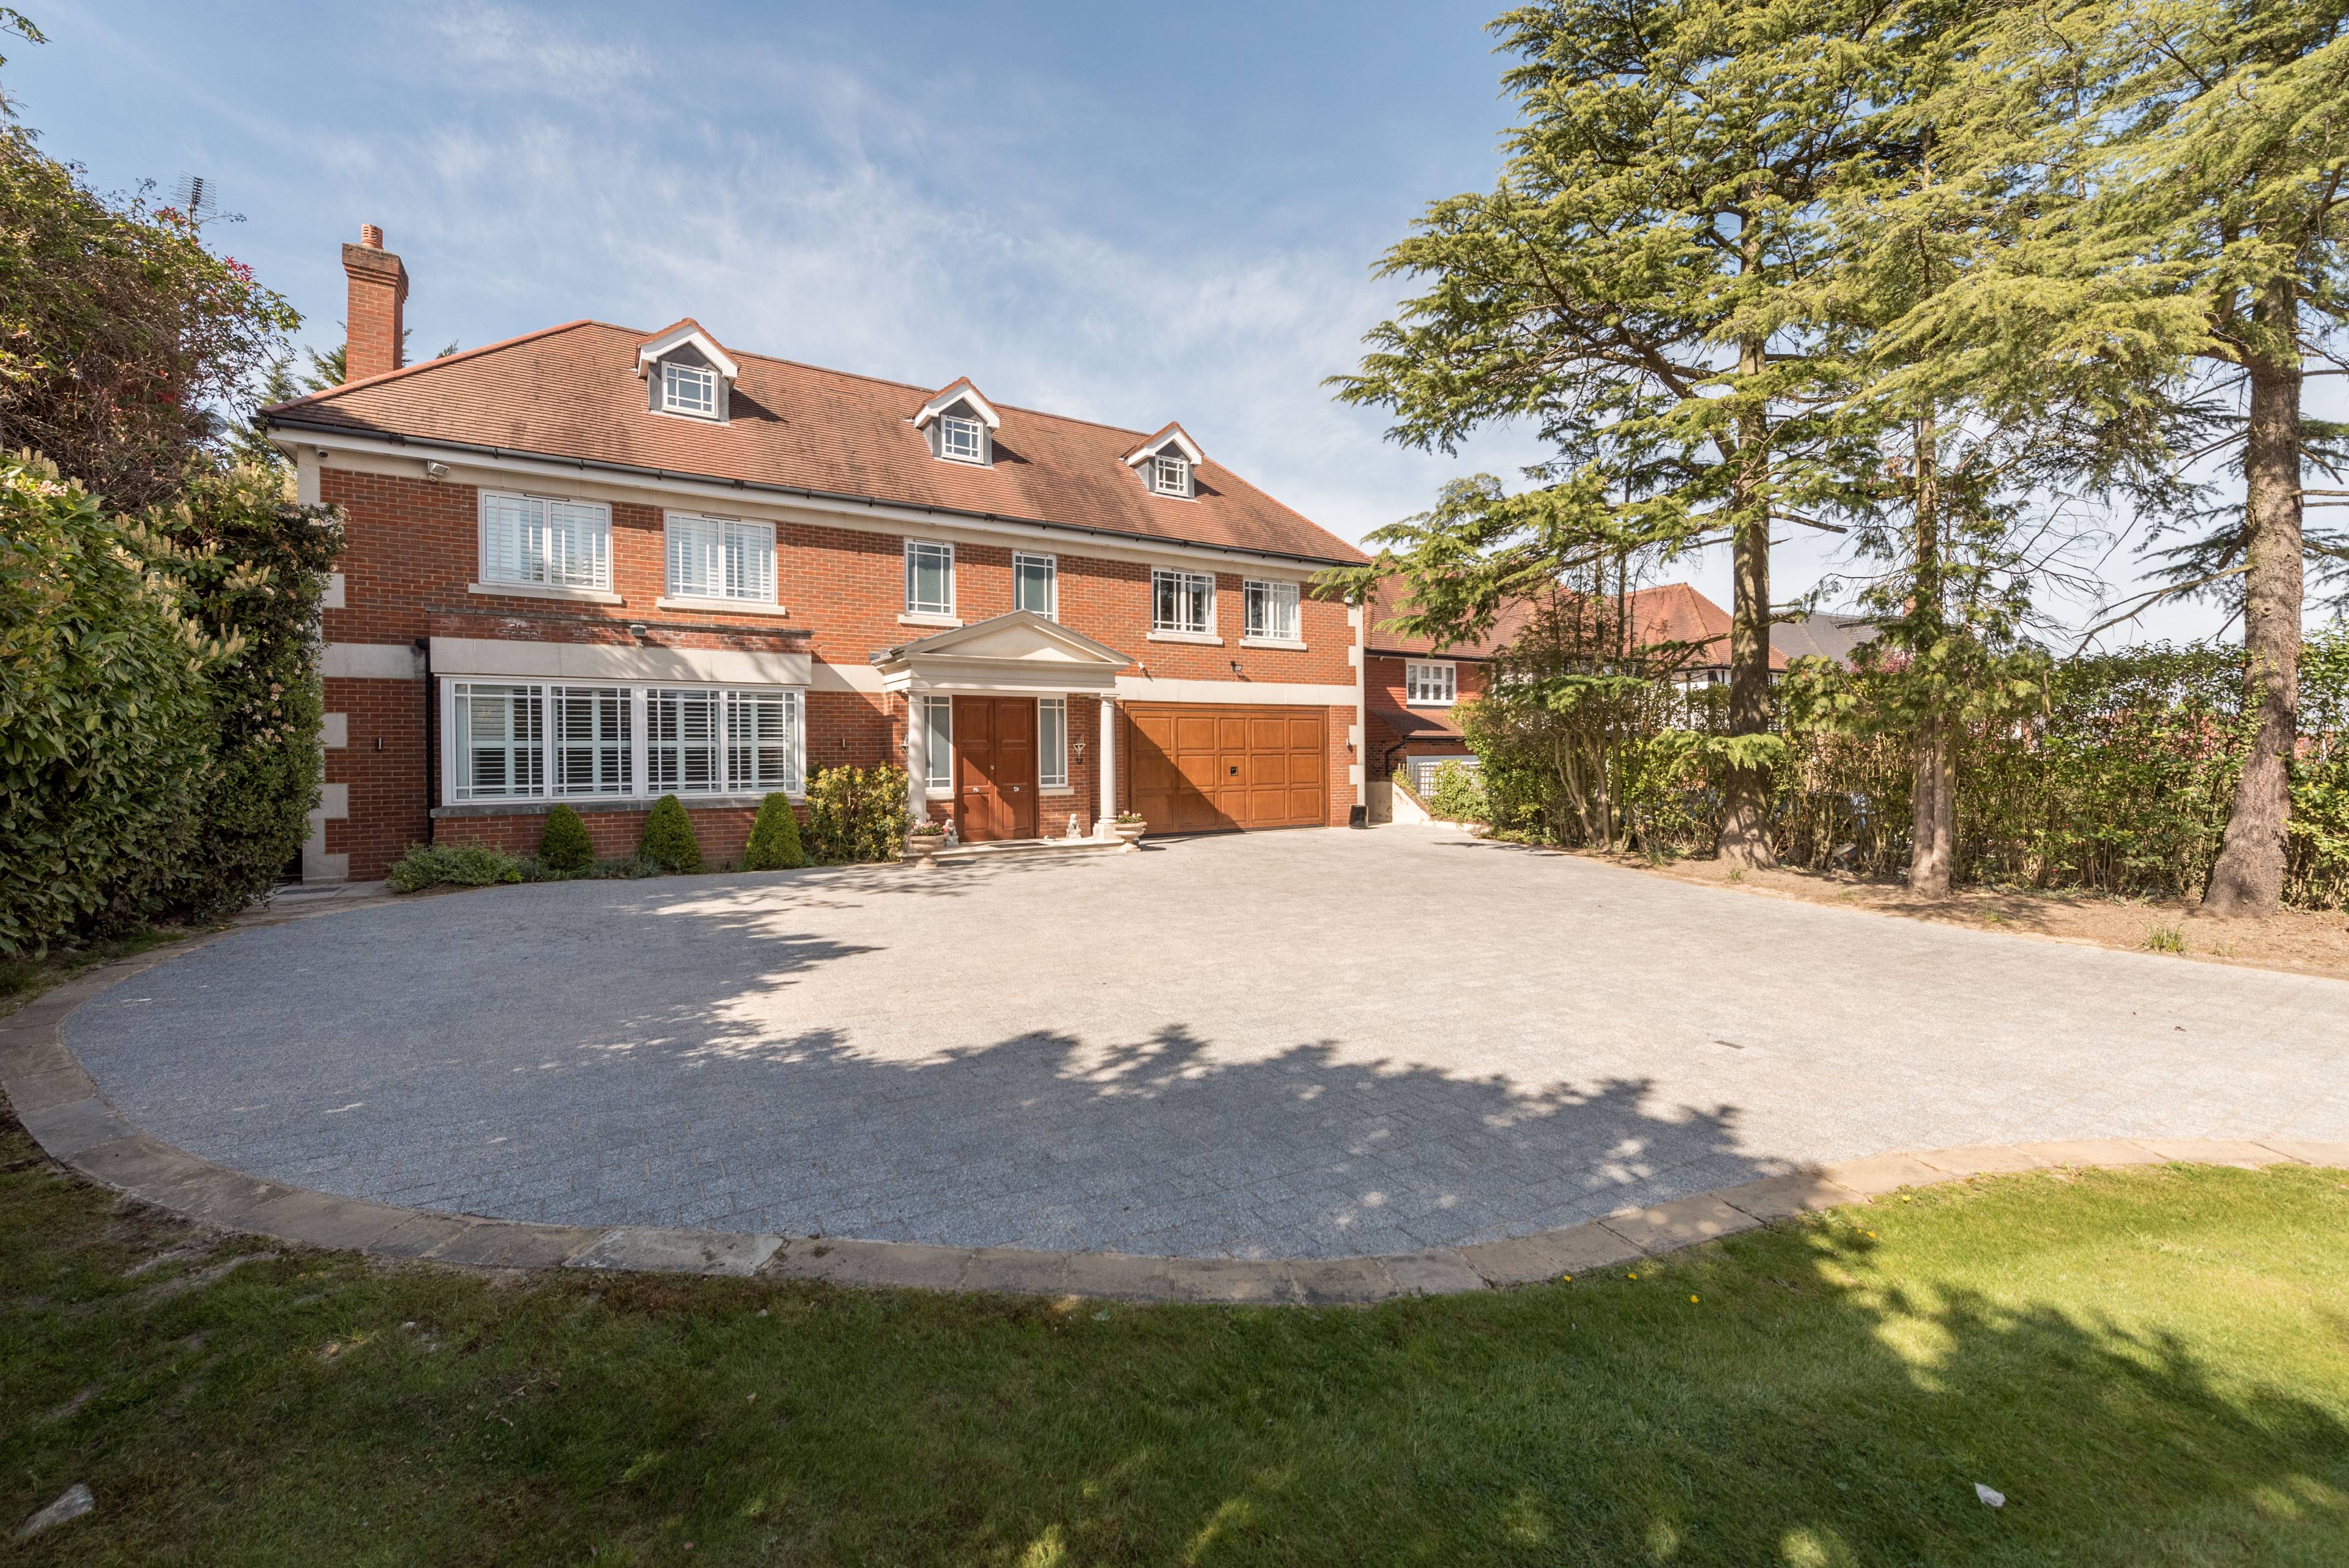 An exceptional 7-bedroom home boasting 7,000 sqft of living space, located in Hadley Wood. Approaching the home, you are greeted with a double fronted-gate that leads you into the driveway providing parking for numerous vehicles and a double garage.